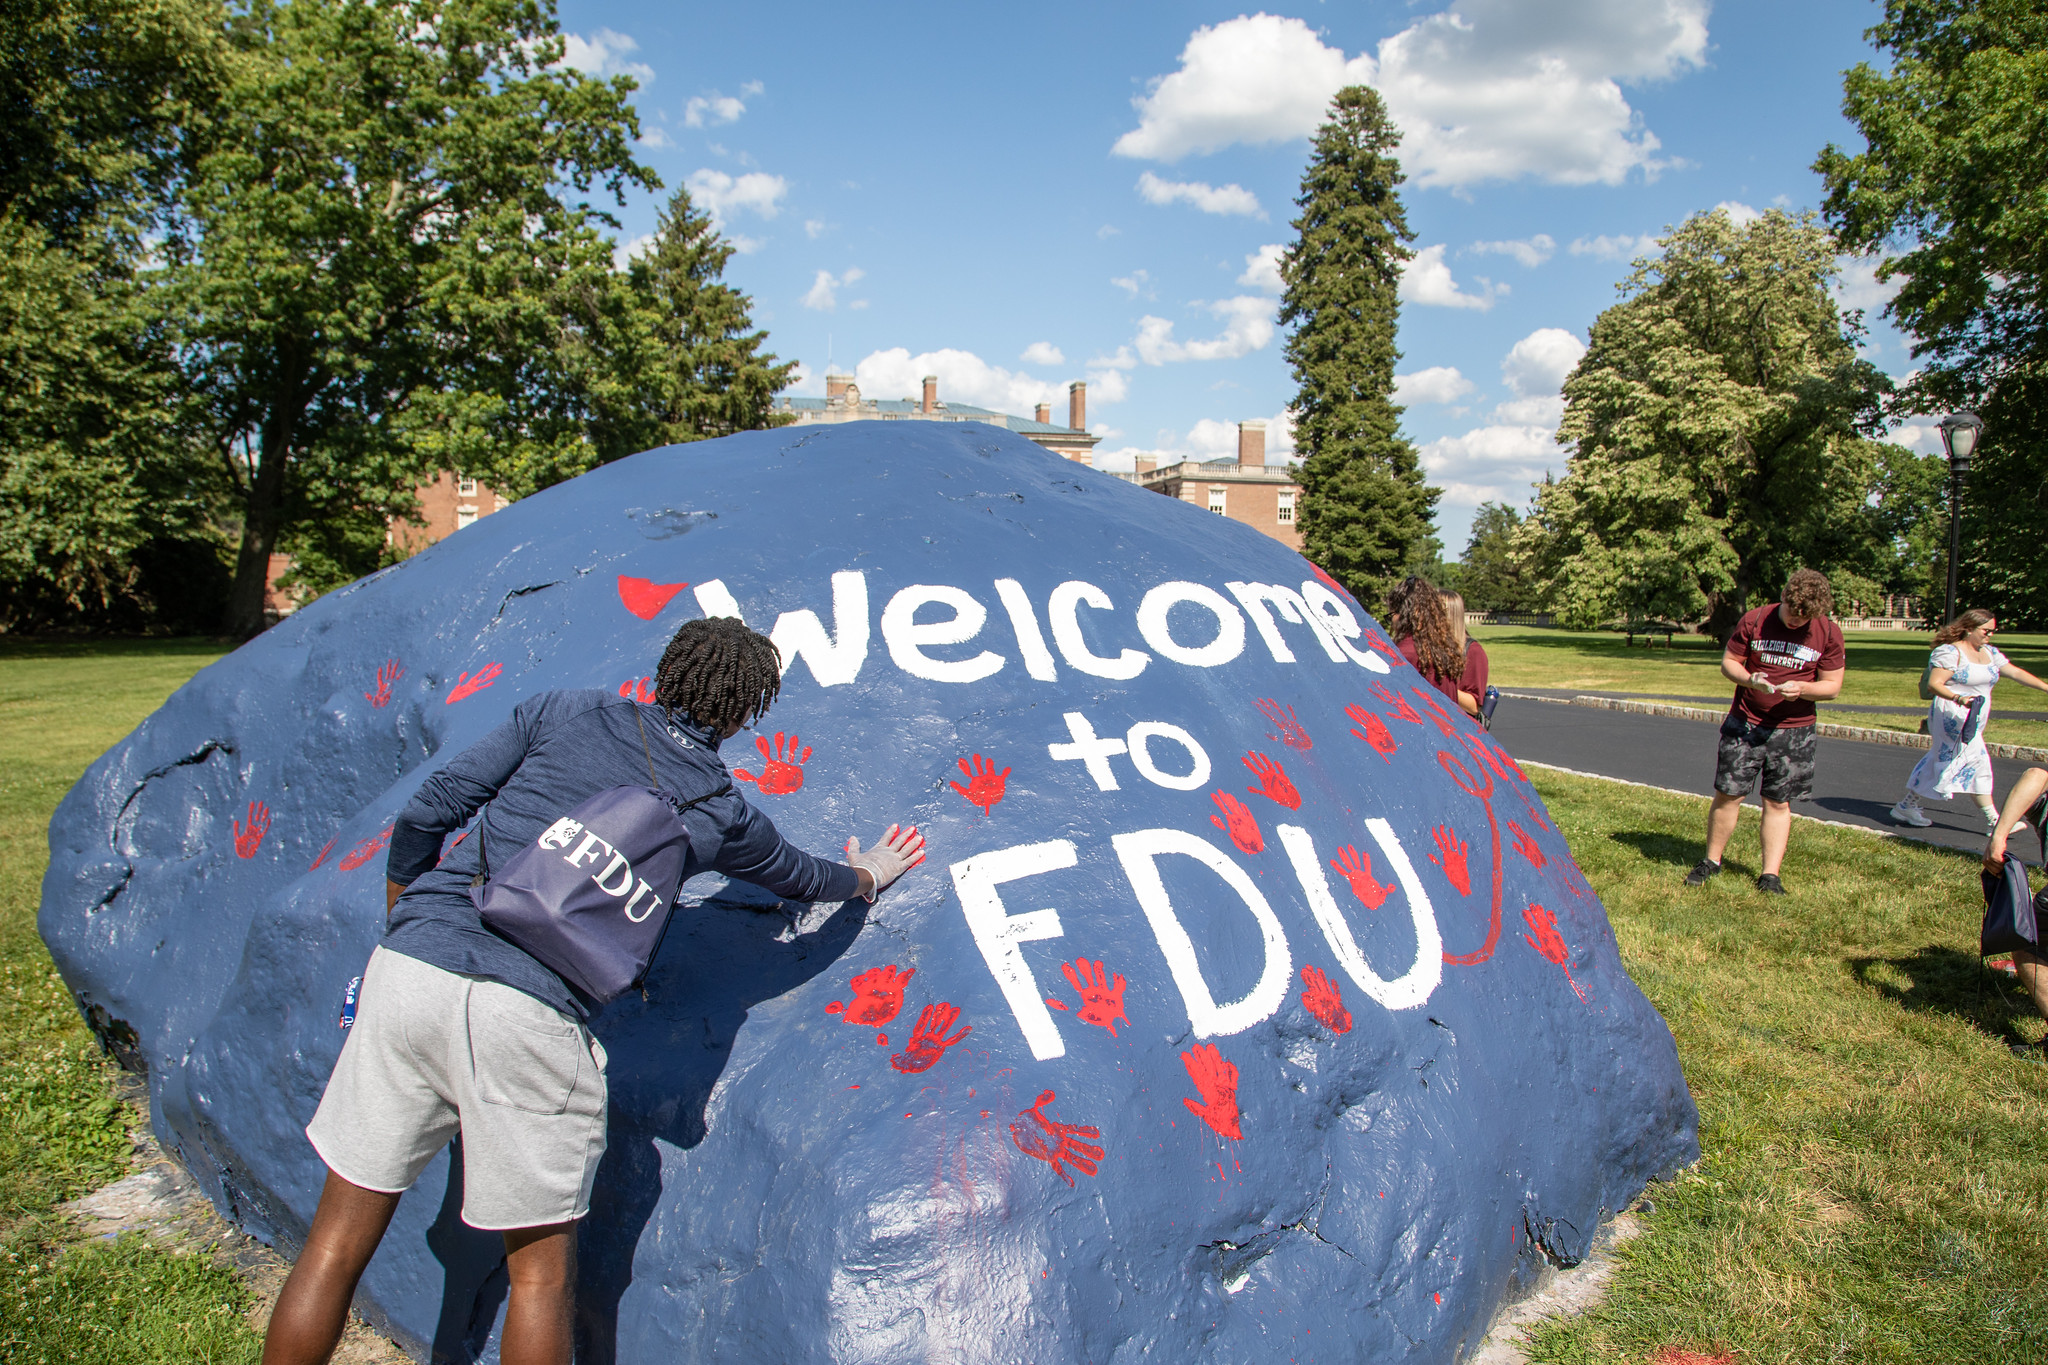 a student places a handprint on a large rock that reads "Welcome to FDU."